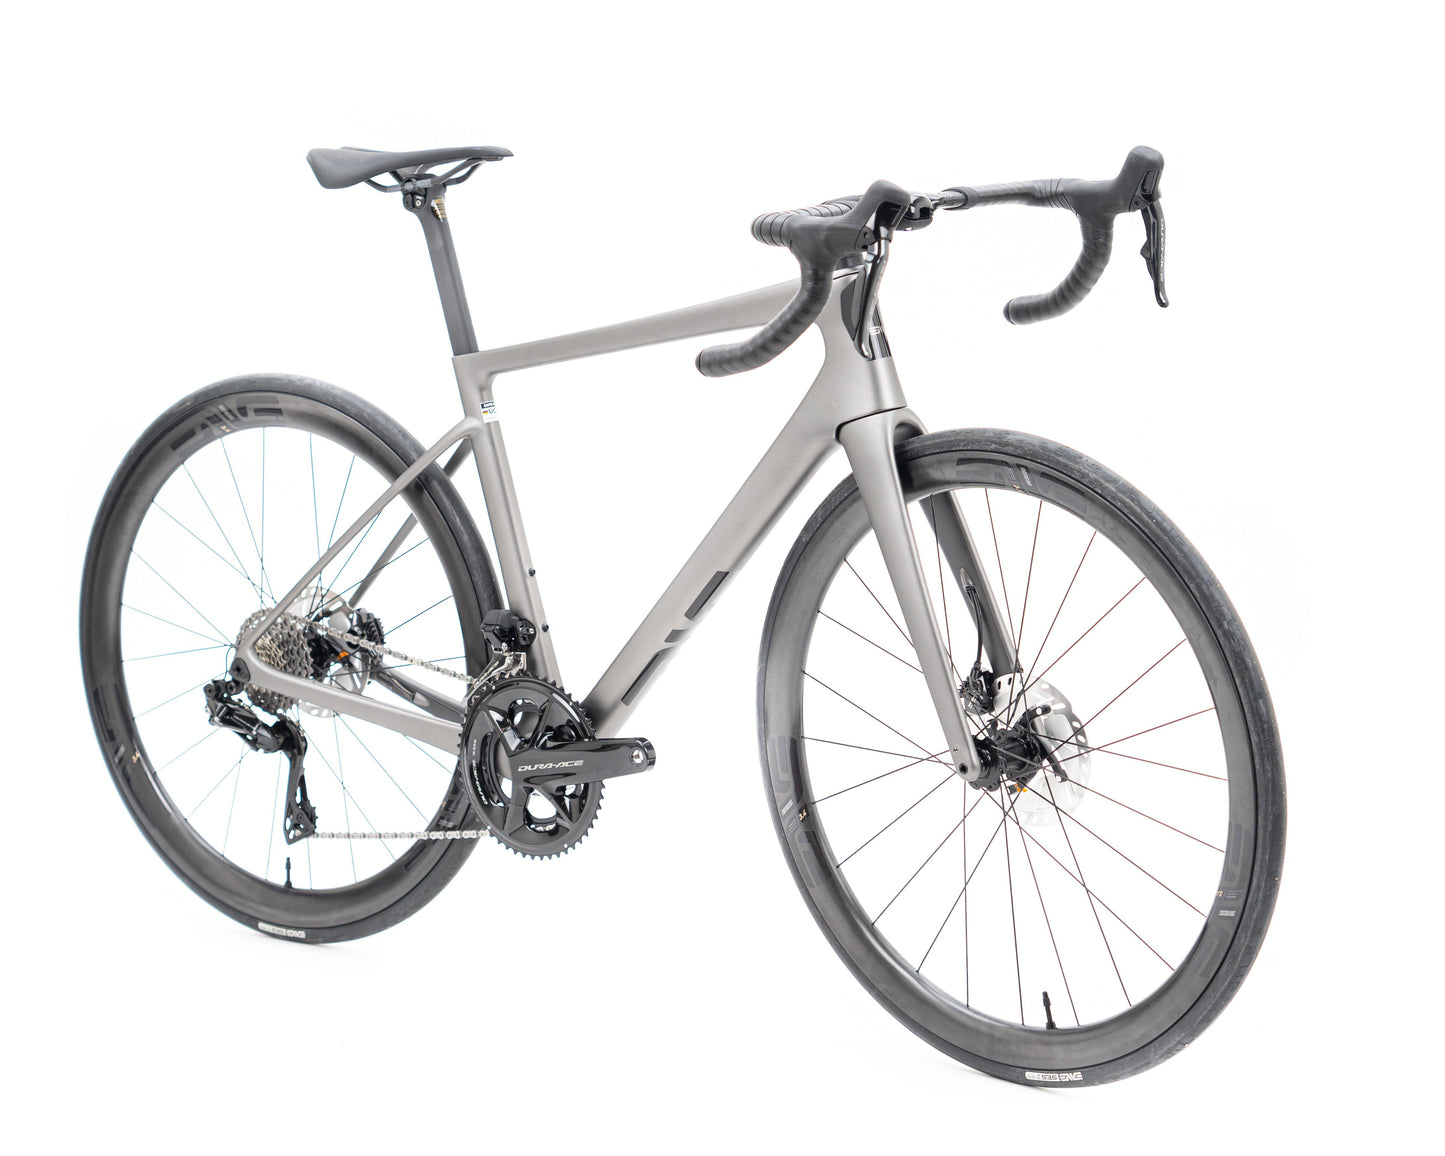 ENVE Melee Pro Build Dura Ace 9200 54cm DamGry